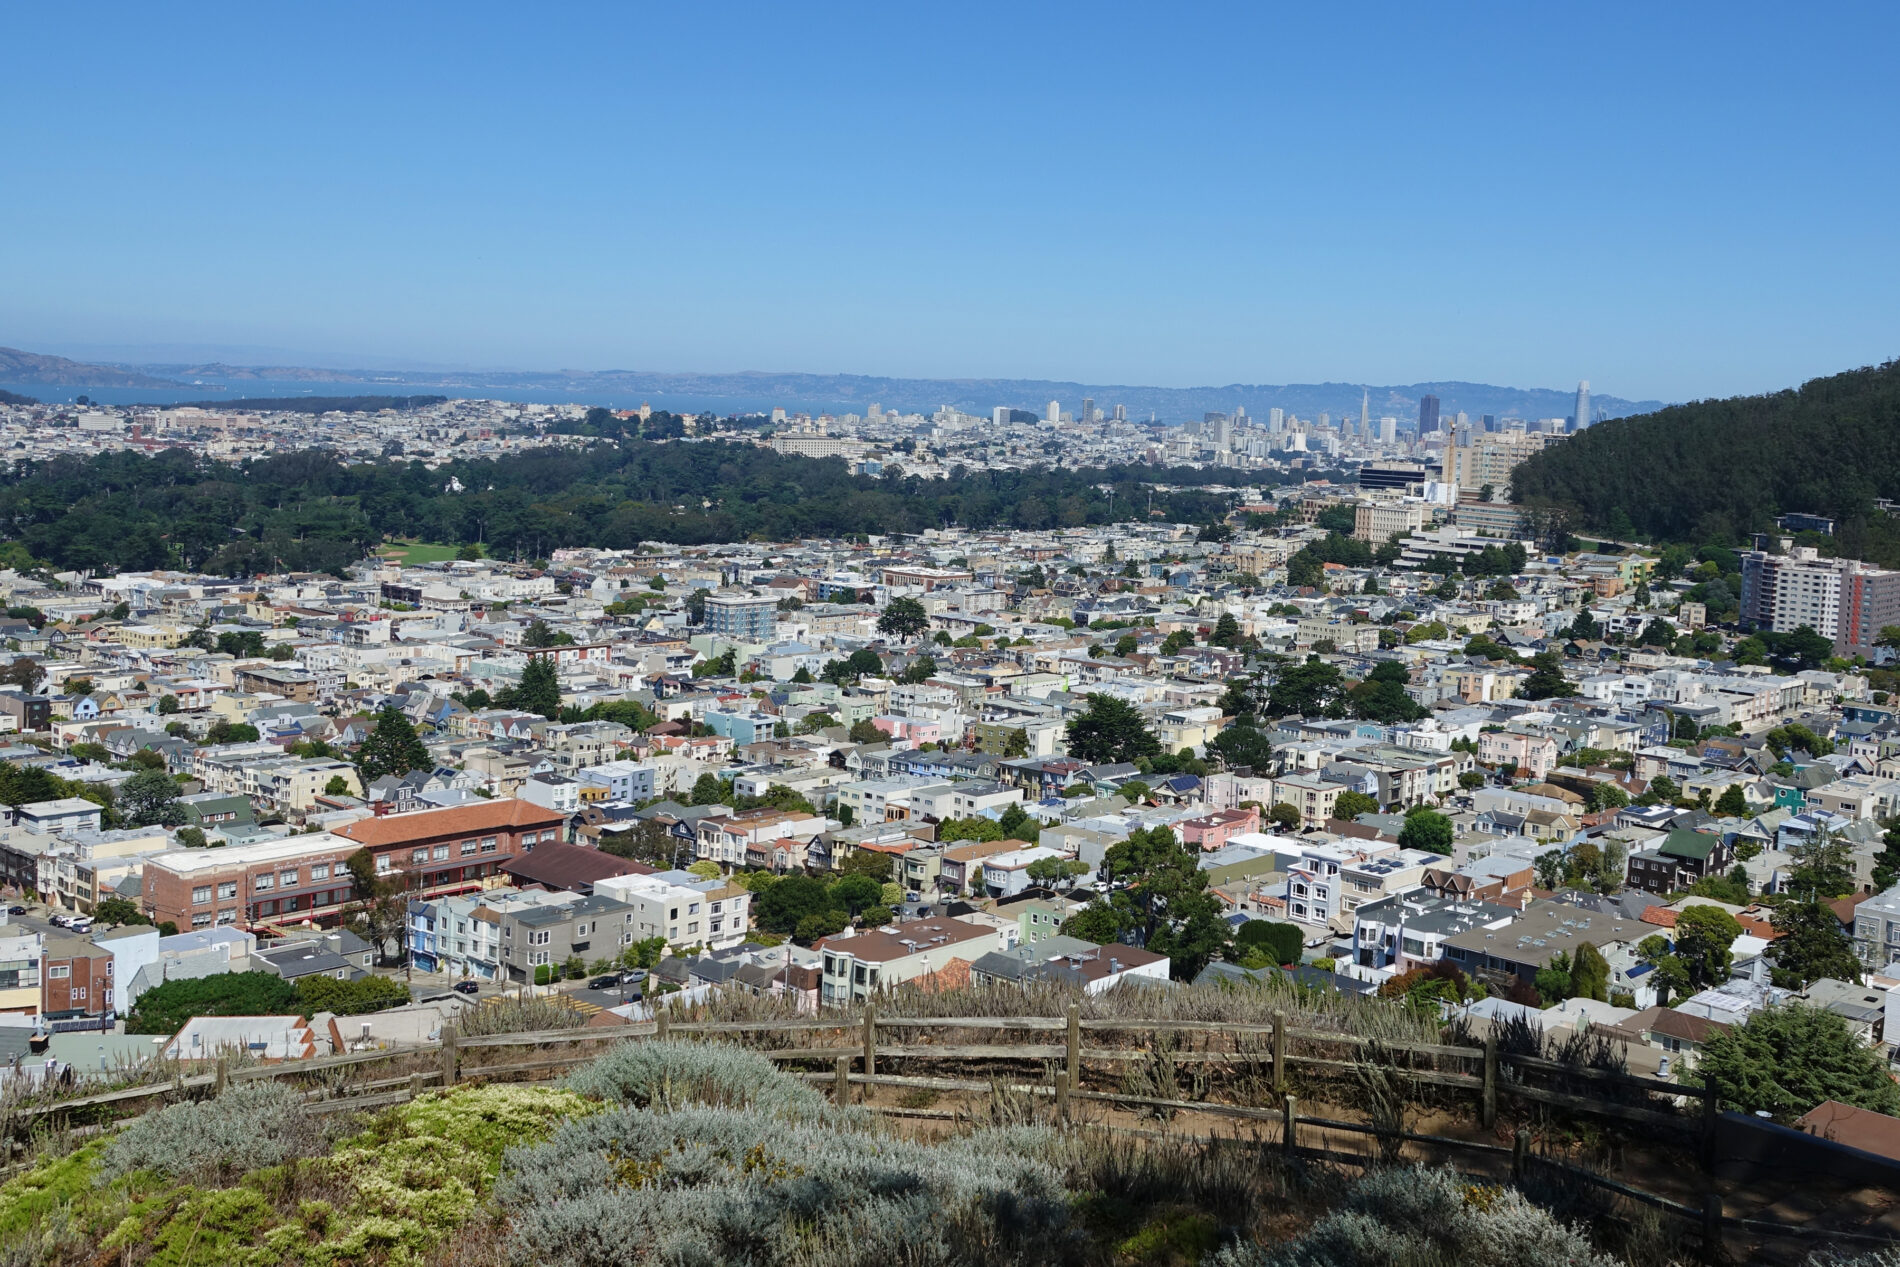 Overlooking San Francisco from Grandview Park on the top of Turtle Hill.